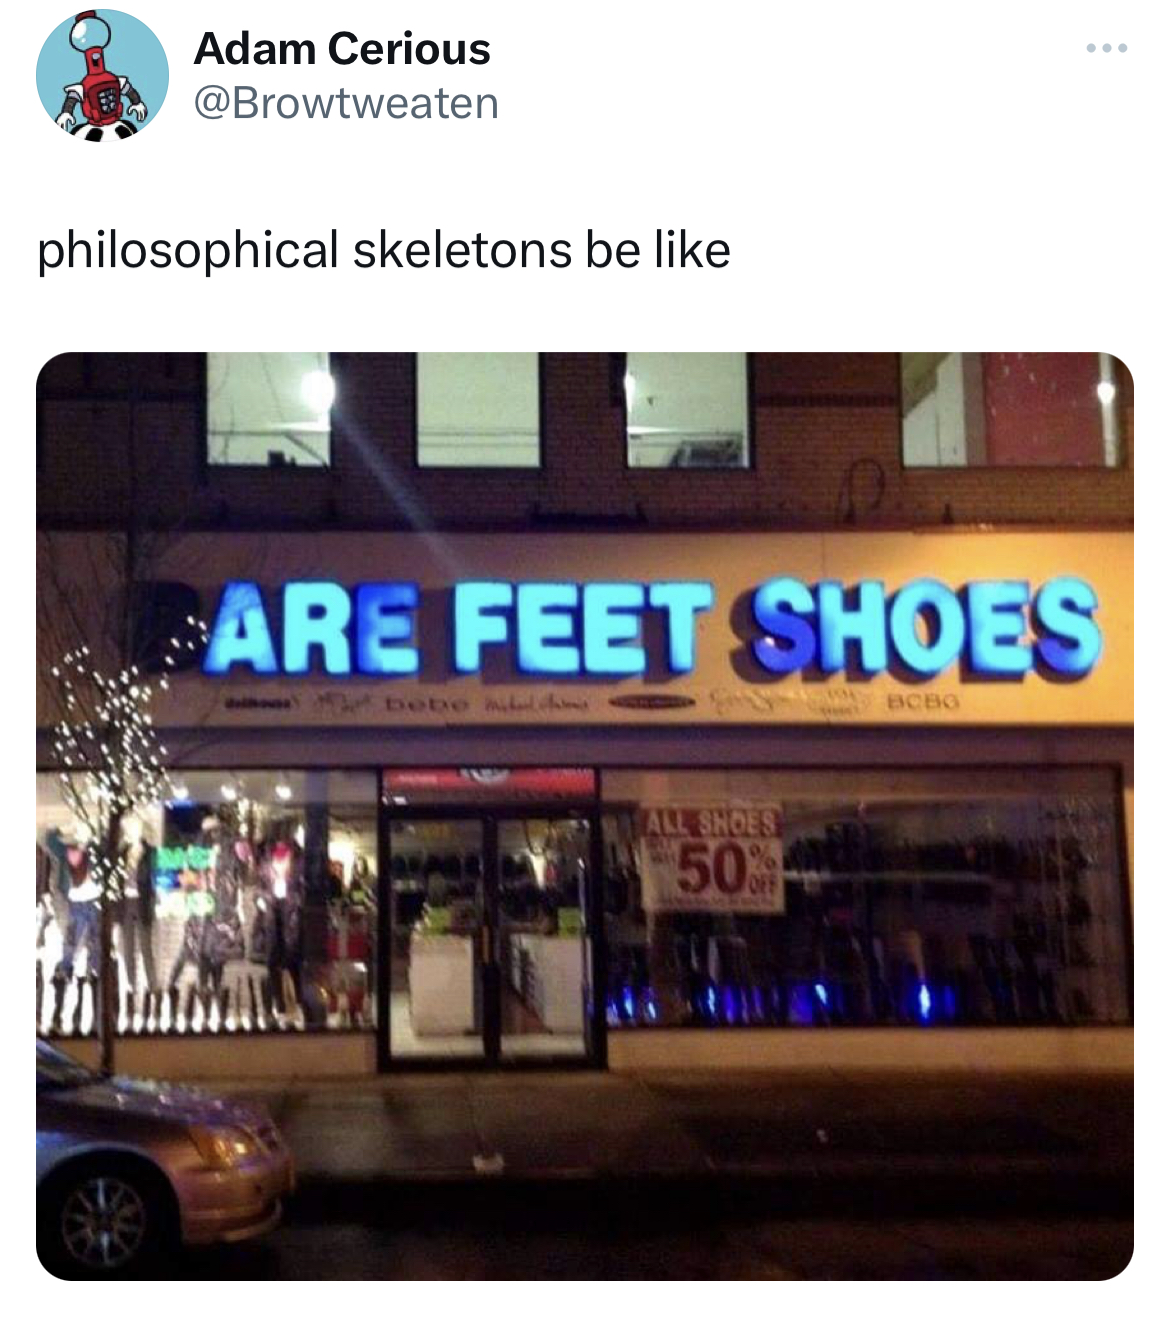 savage and salty tweets - store sign funny - Adam Cerious philosophical skeletons be Are Feet Shoes Bcbo All Shoes 50